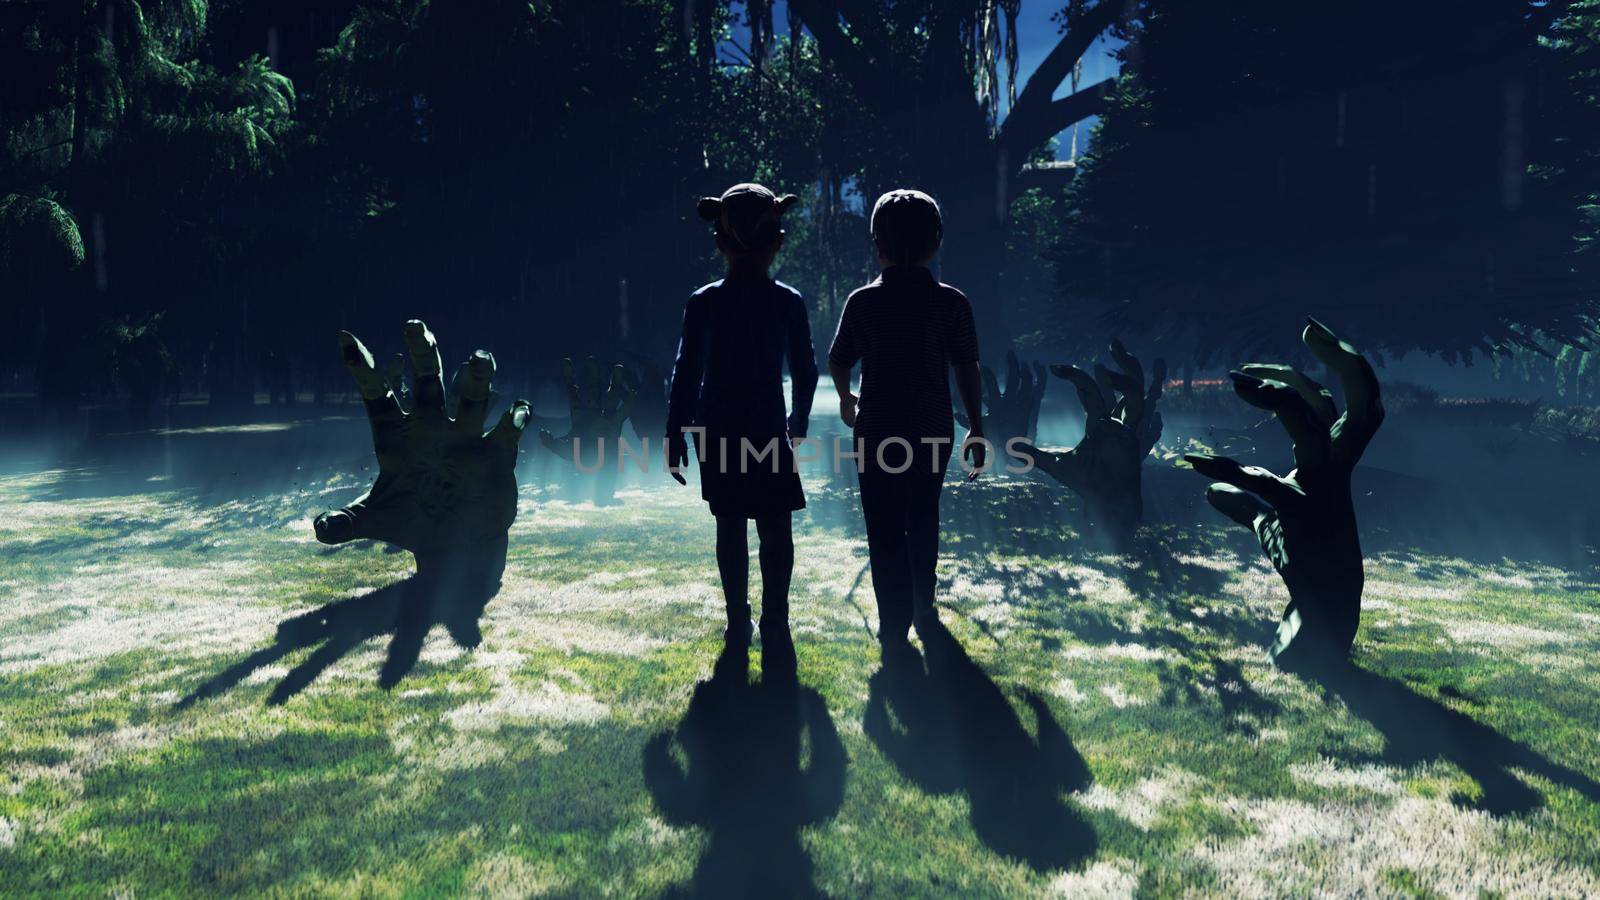 Little children walk through a dark mysterious misty swamp forest landscape. Dead hands reach for them from the ground, steam rises from the swamp, for a Halloween backdrop.